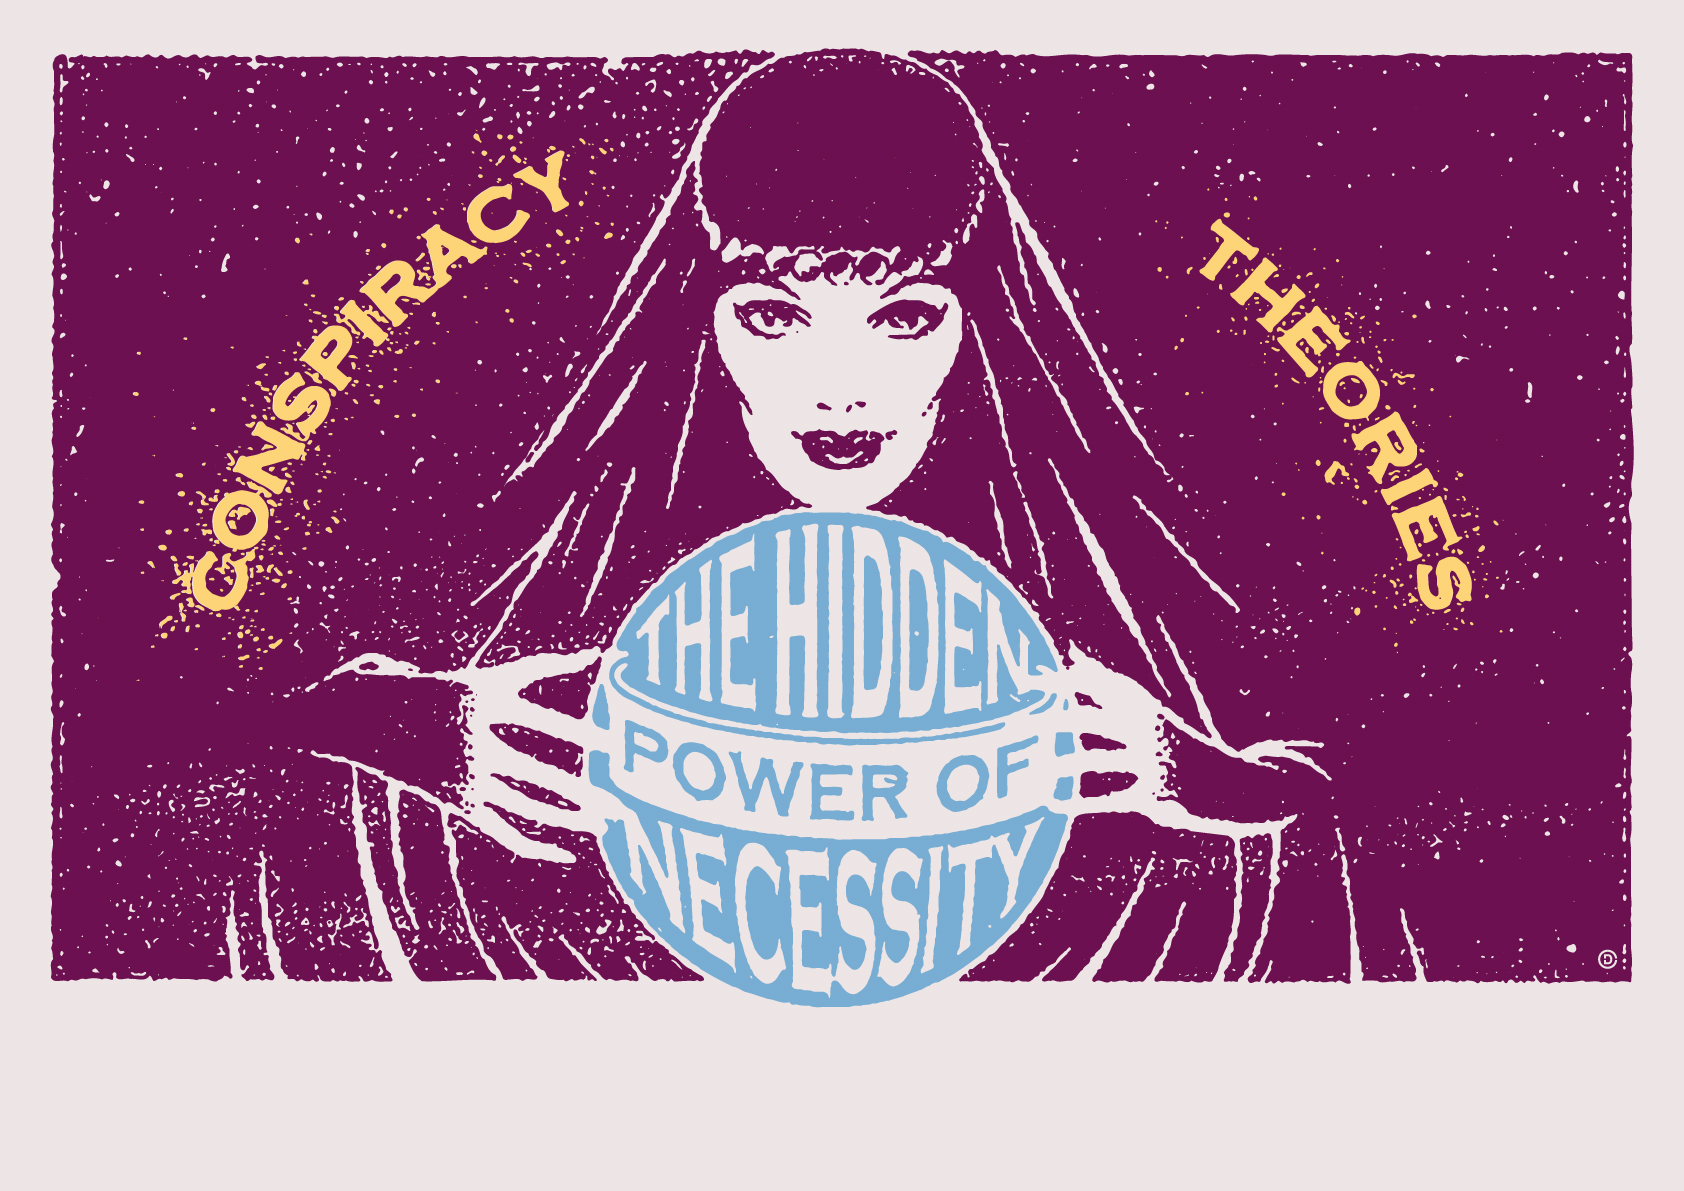 Illustration of a fortune teller with the words "The hidden power of necessity" in a crystal ball and the words "Conspiracy Theories" in the background.